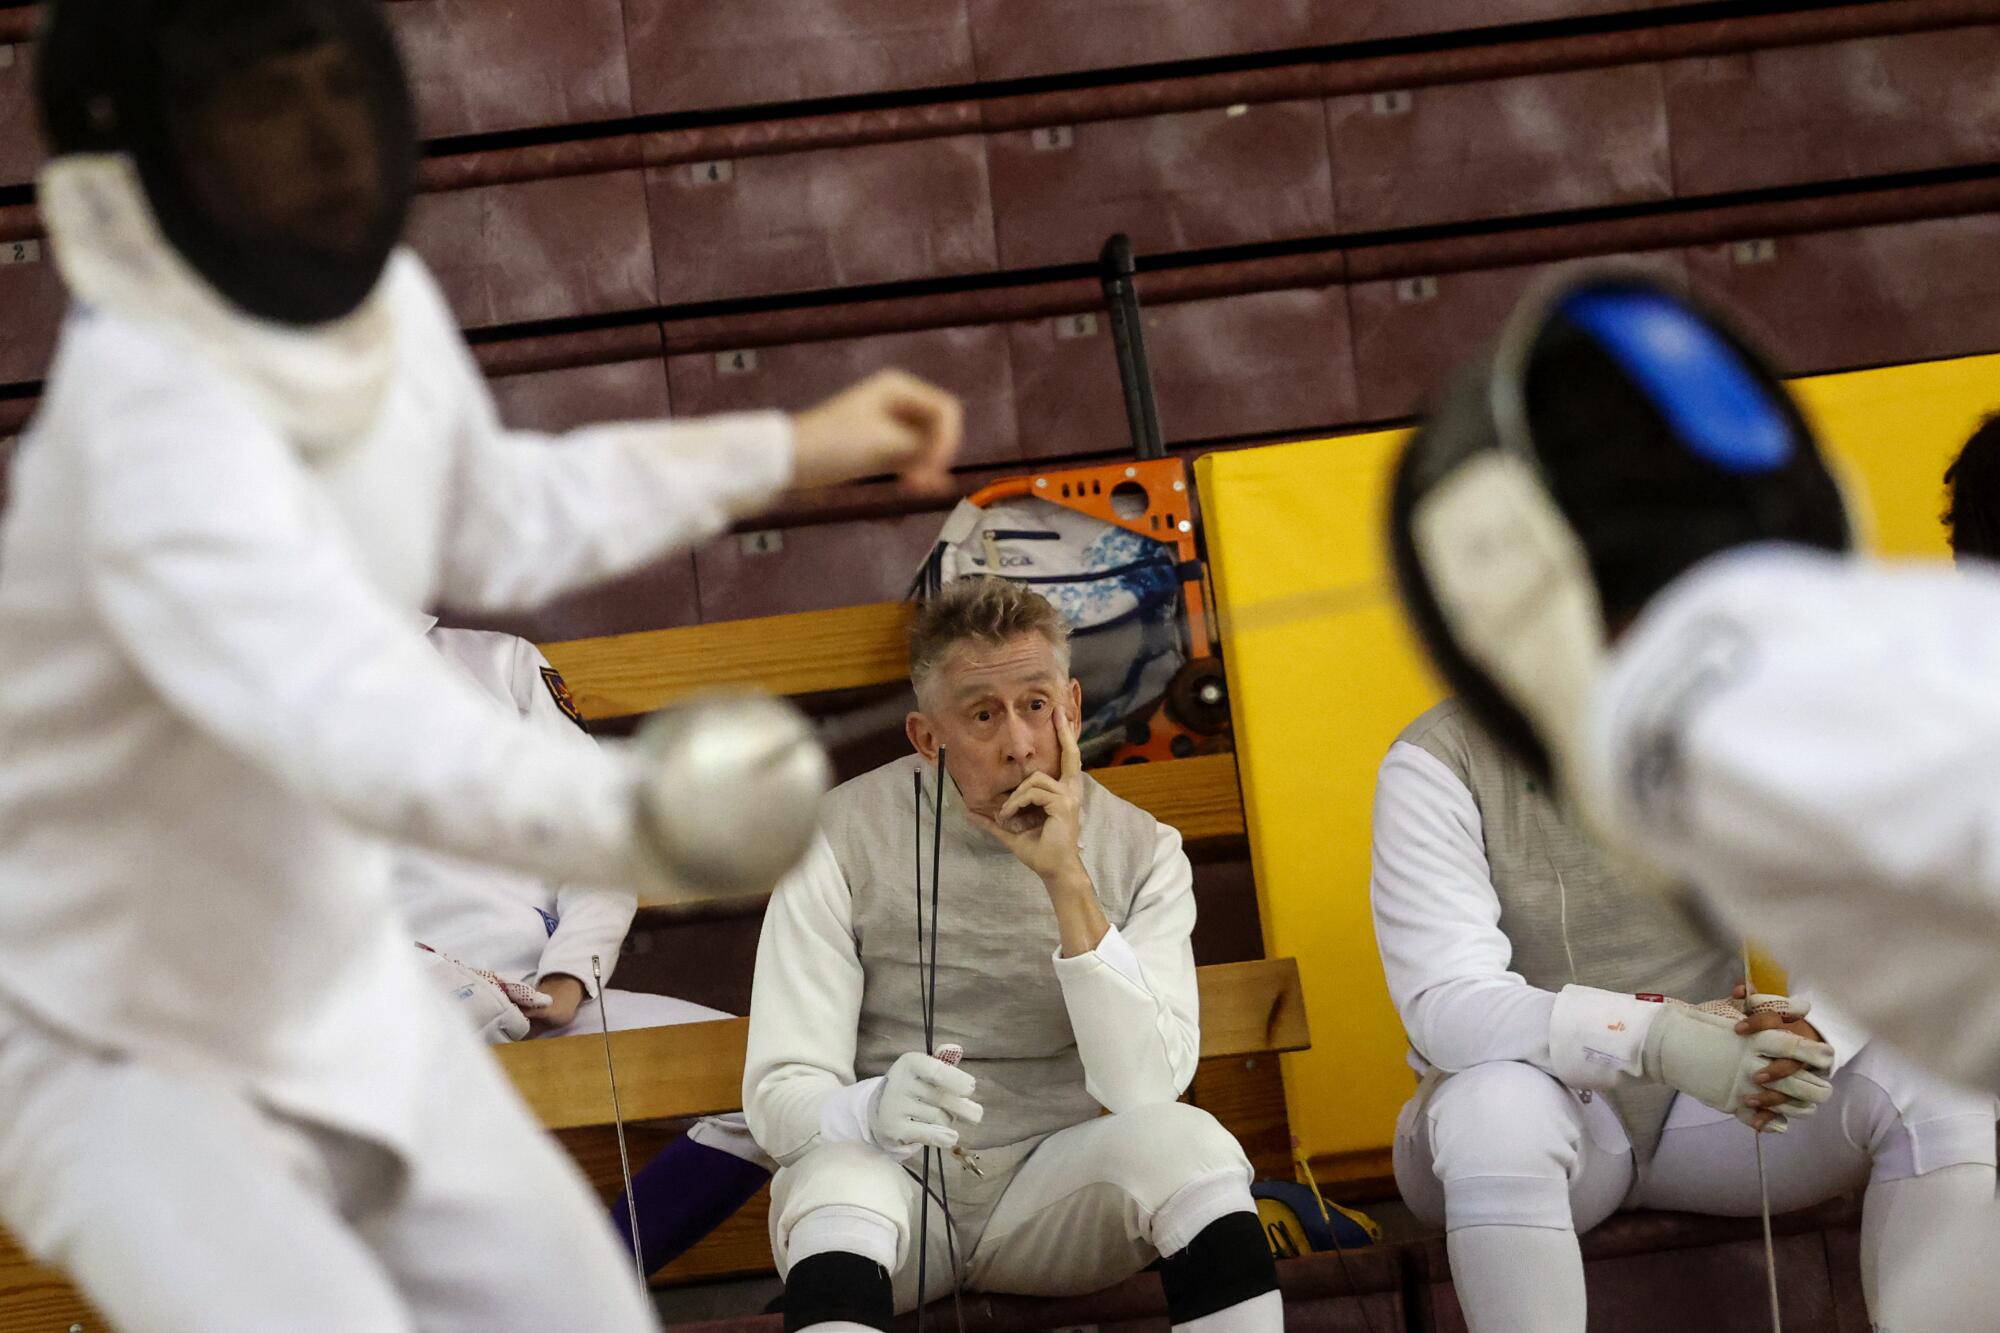 David Wharton watches as he waits to compete in the senior foil event.